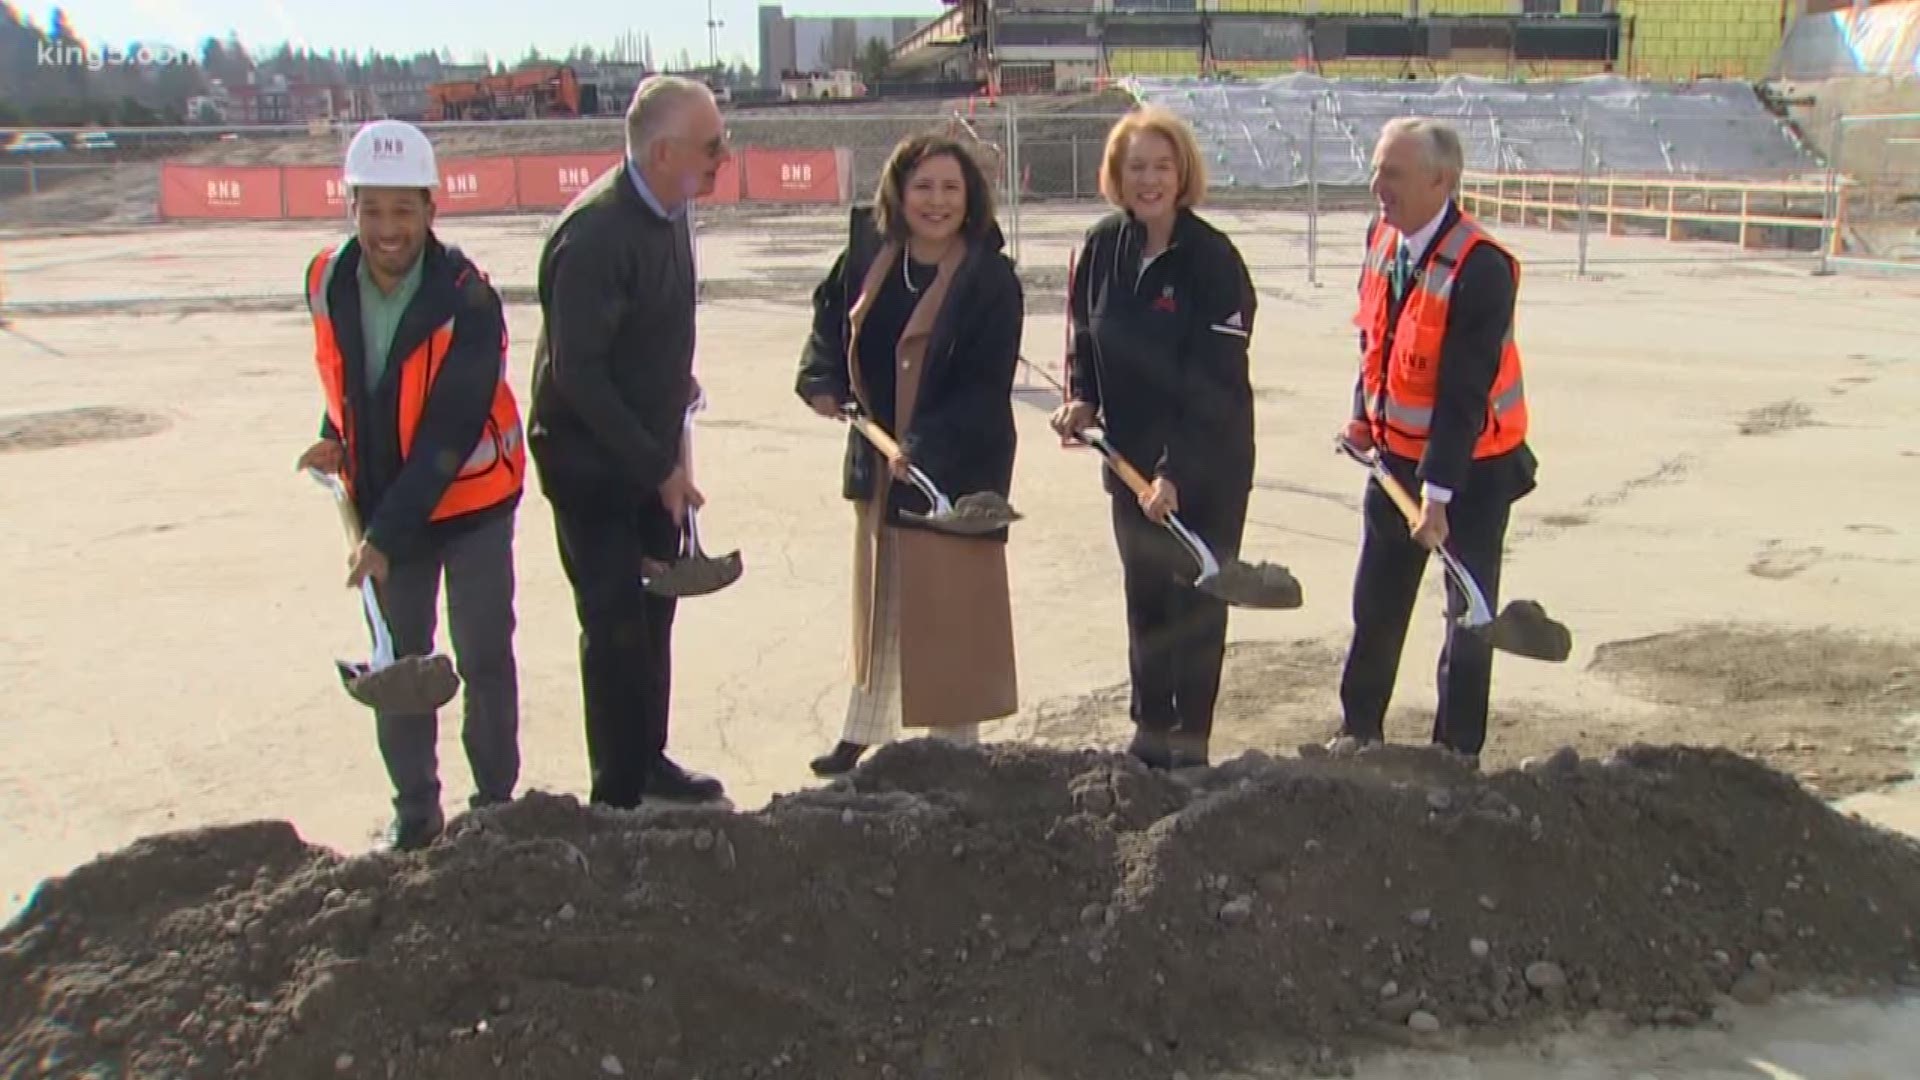 NHL Seattle broke ground on a new $80 million training facility and community center at Northgate. It is just one part of a larger project to re-envision the mall.